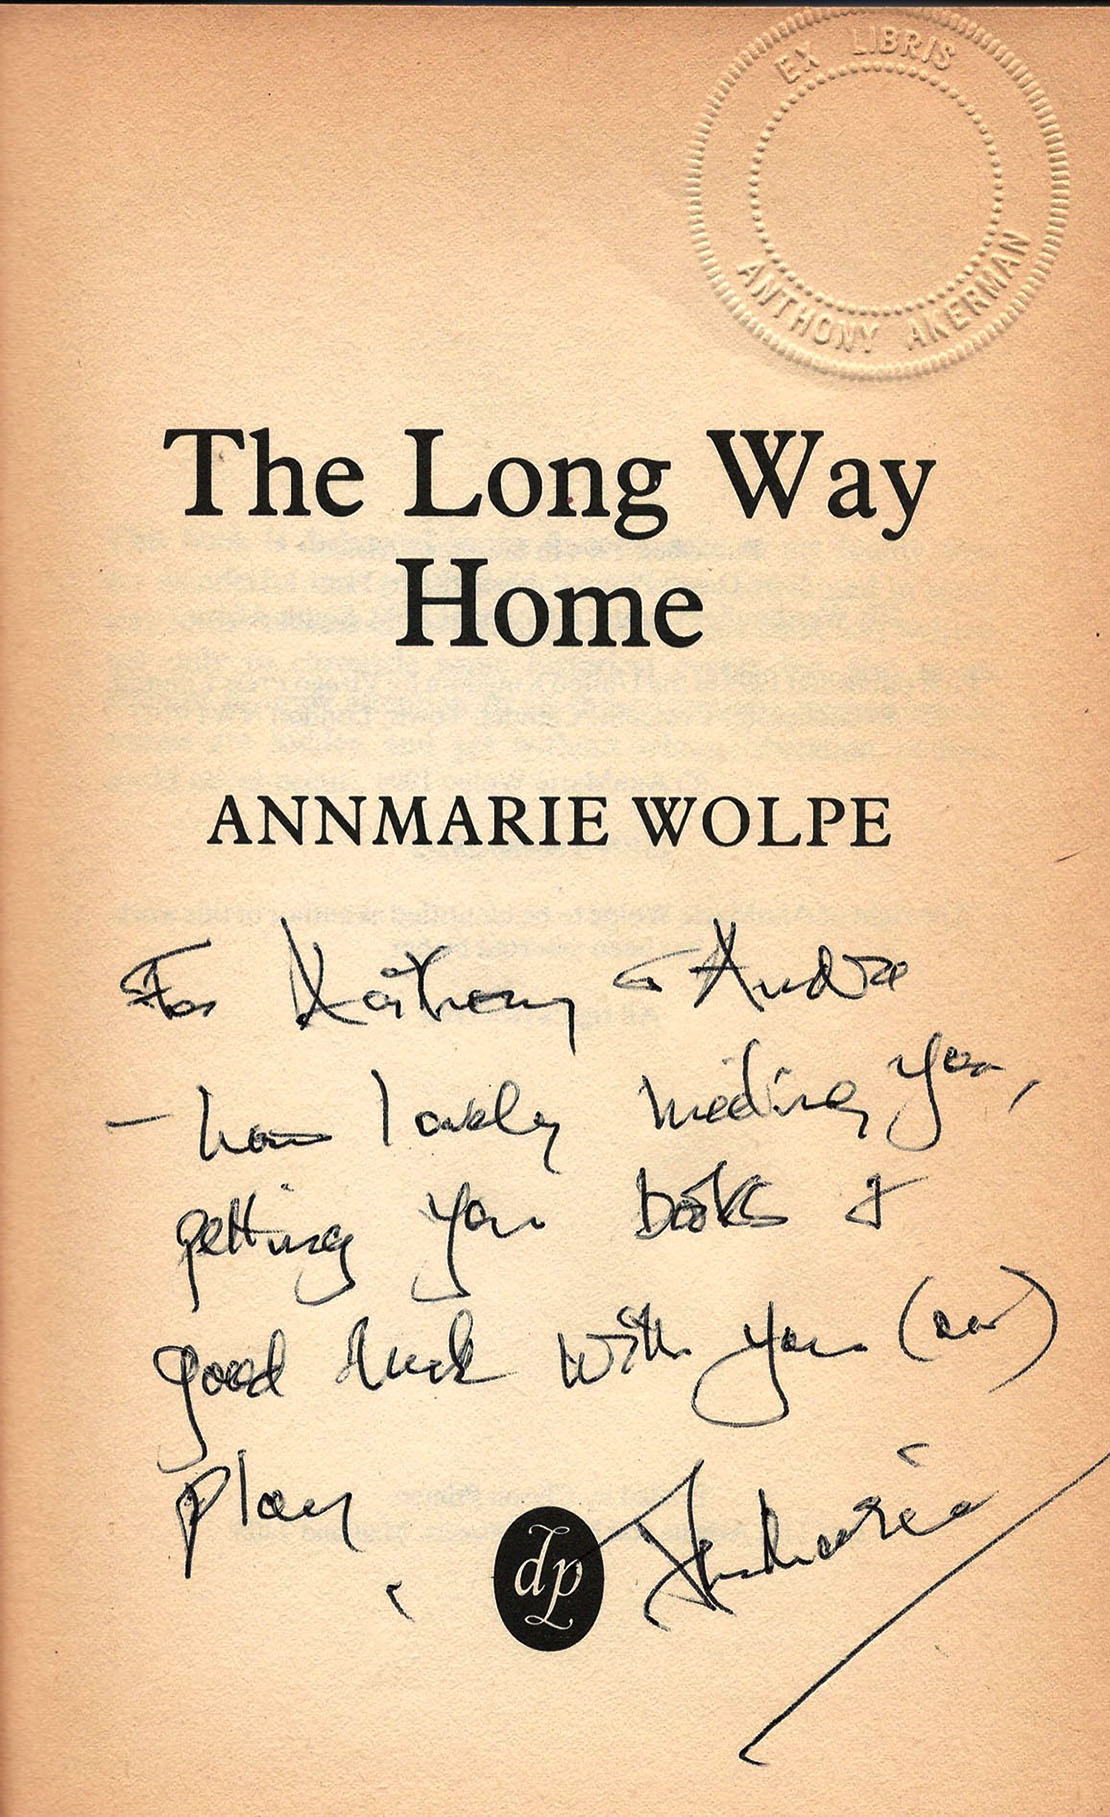 The Long Way Home, AnnMarie Wolpe